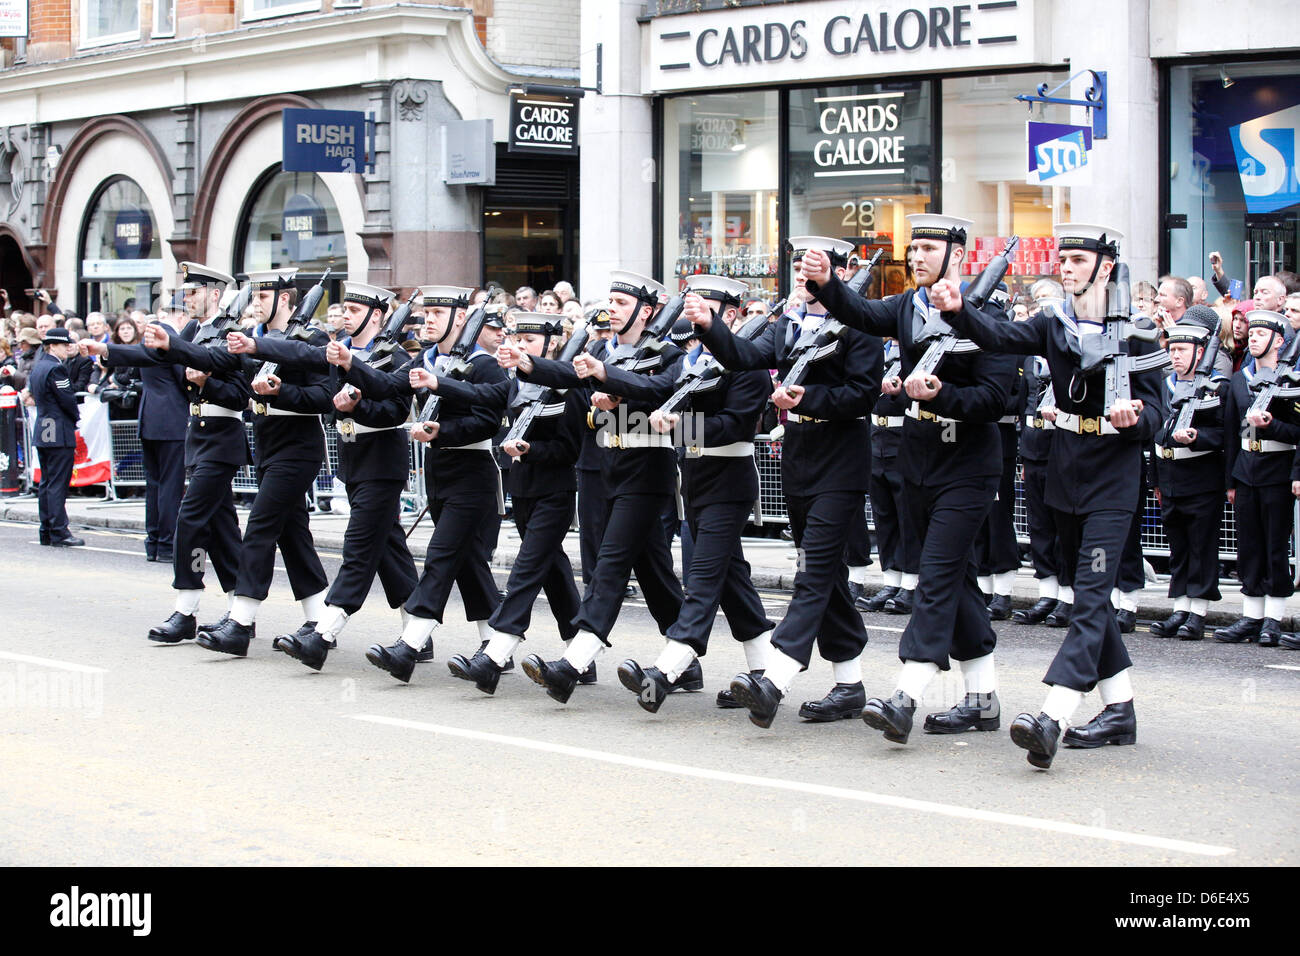 London, UK. 17th of April 2013.  The funeral of former prime minister Margaret Thatcher was held at St. Paul's Cathedral this morning. Military demonstrations along the way. Credit: Lydia Pagoni/Alamy Live News Stock Photo